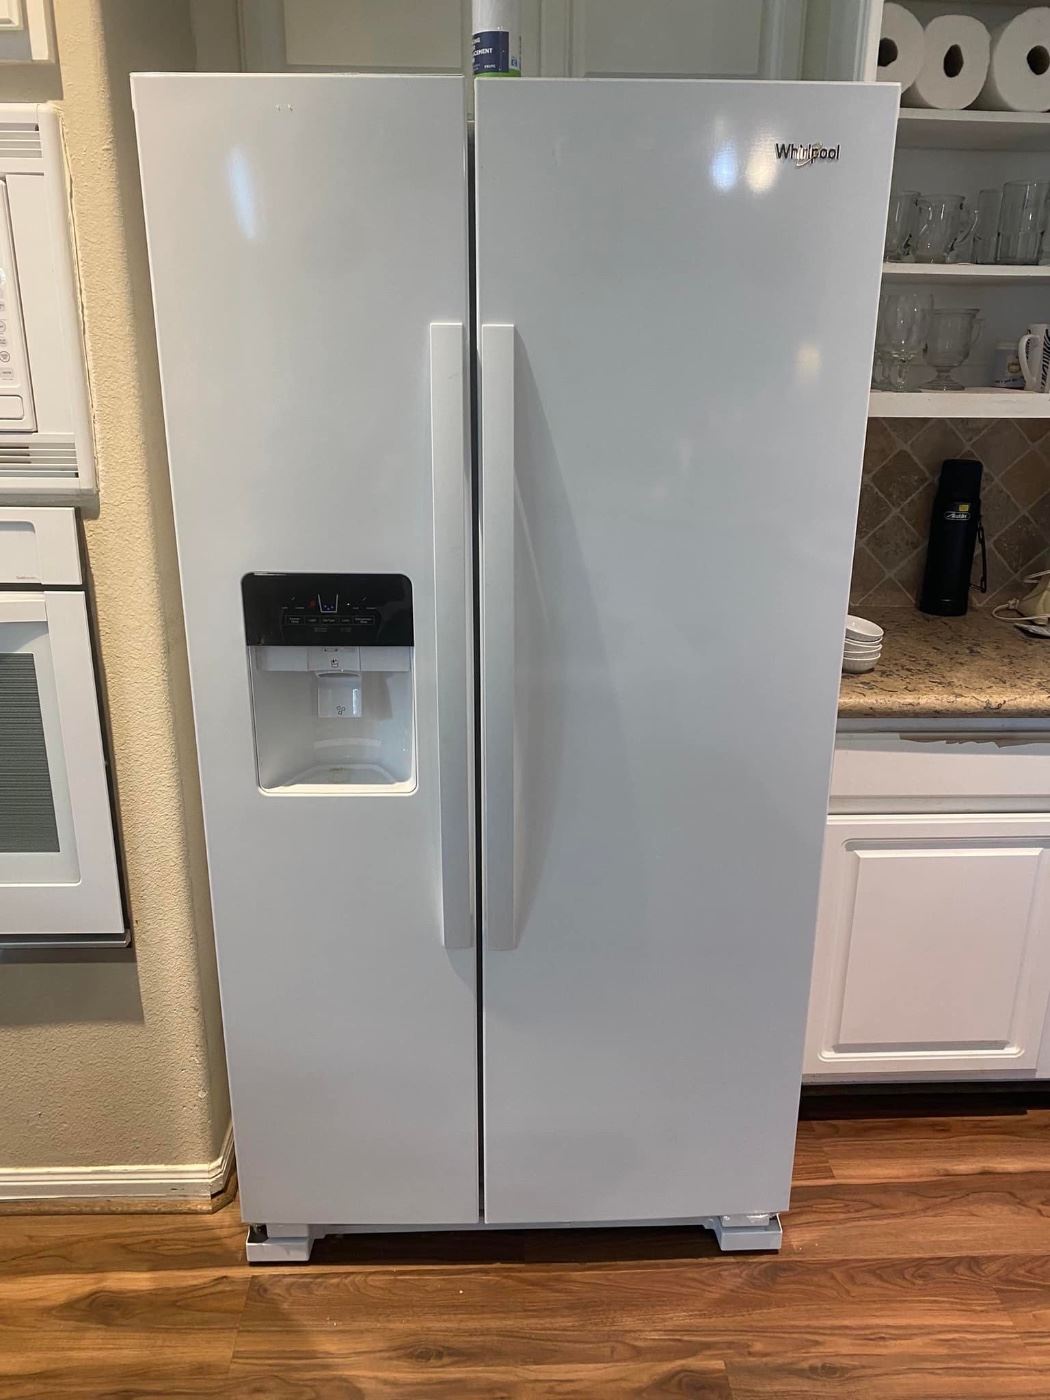 Whirlpool Refrigerator
Excellent working condition.
Only 4 years old.
Water & Ice work
3’ across x 30 1/2” deep x 69 1/2” tall
Must be able to move and load yourself.